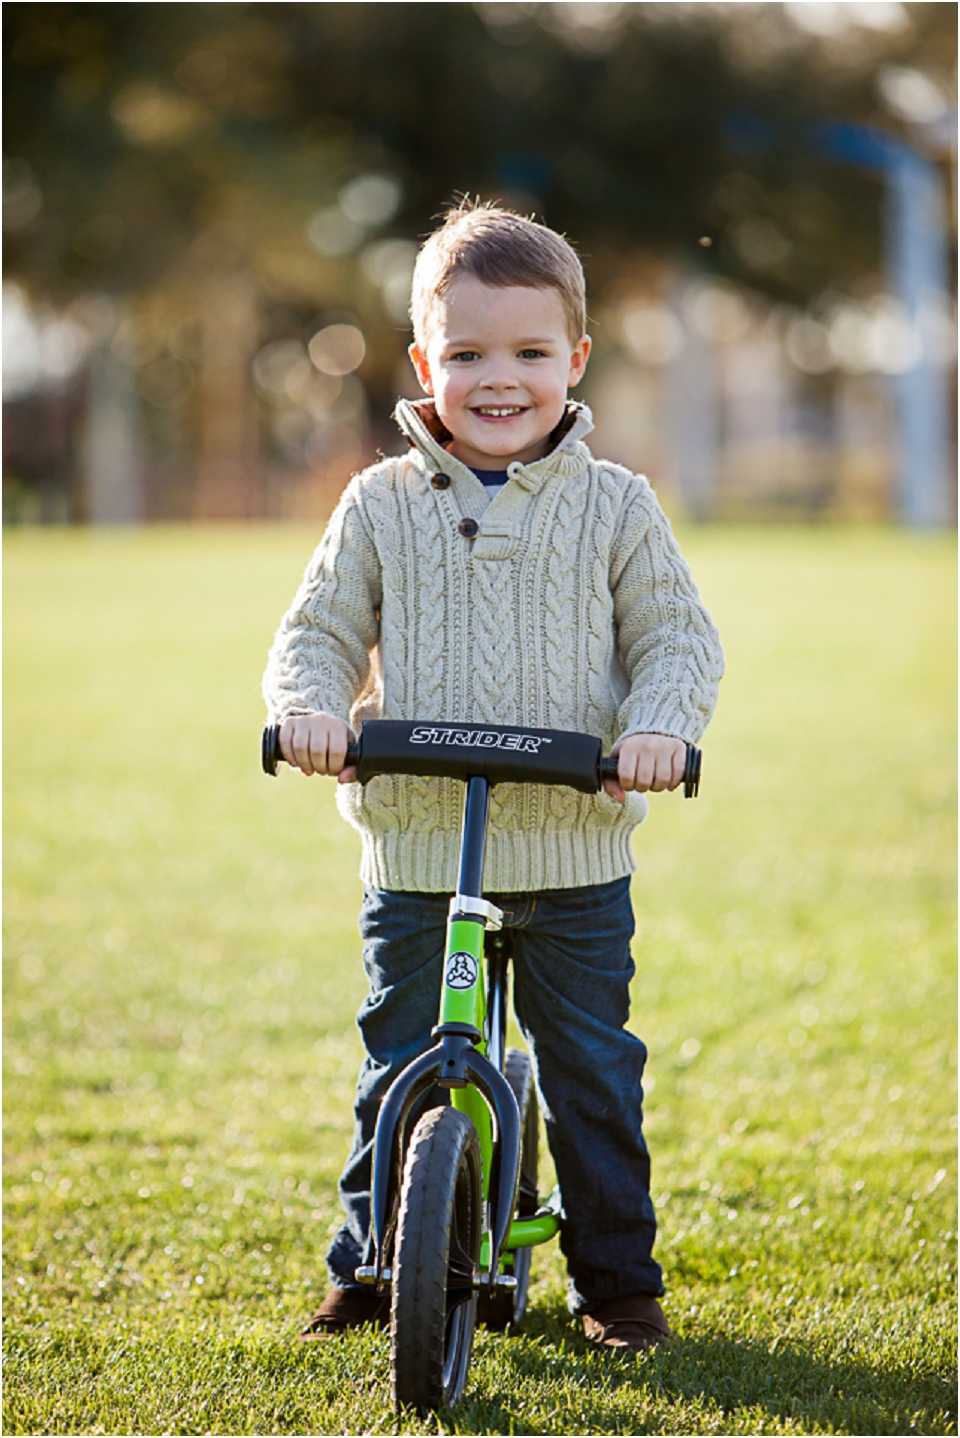 A Young With His Bike at the Park